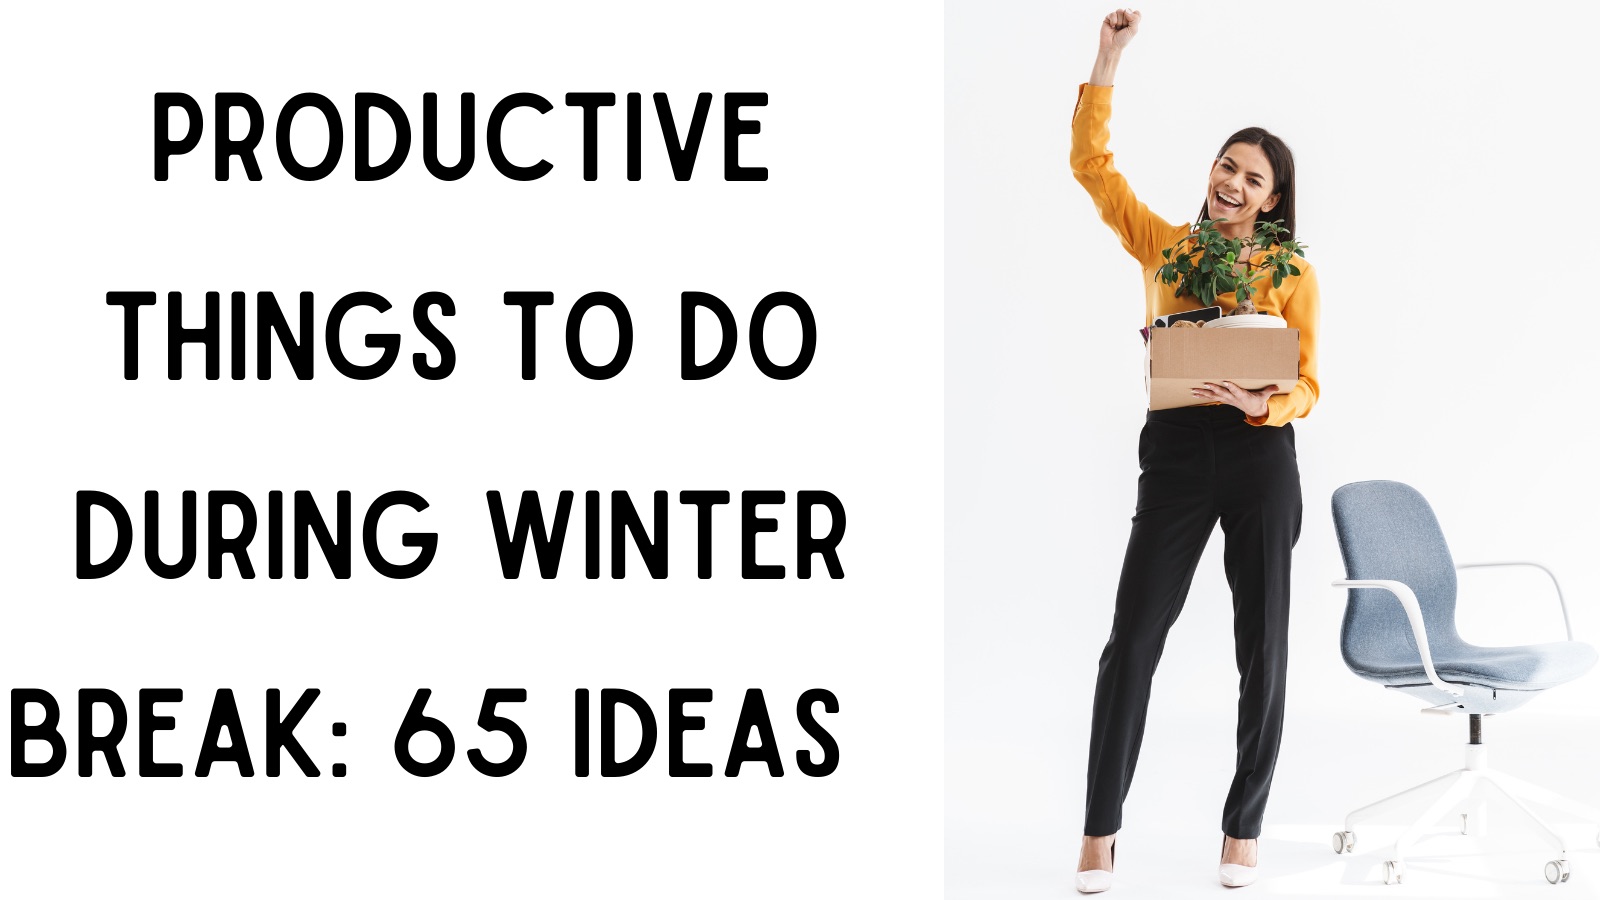 Productive things to do during winter break: 65 ideas!